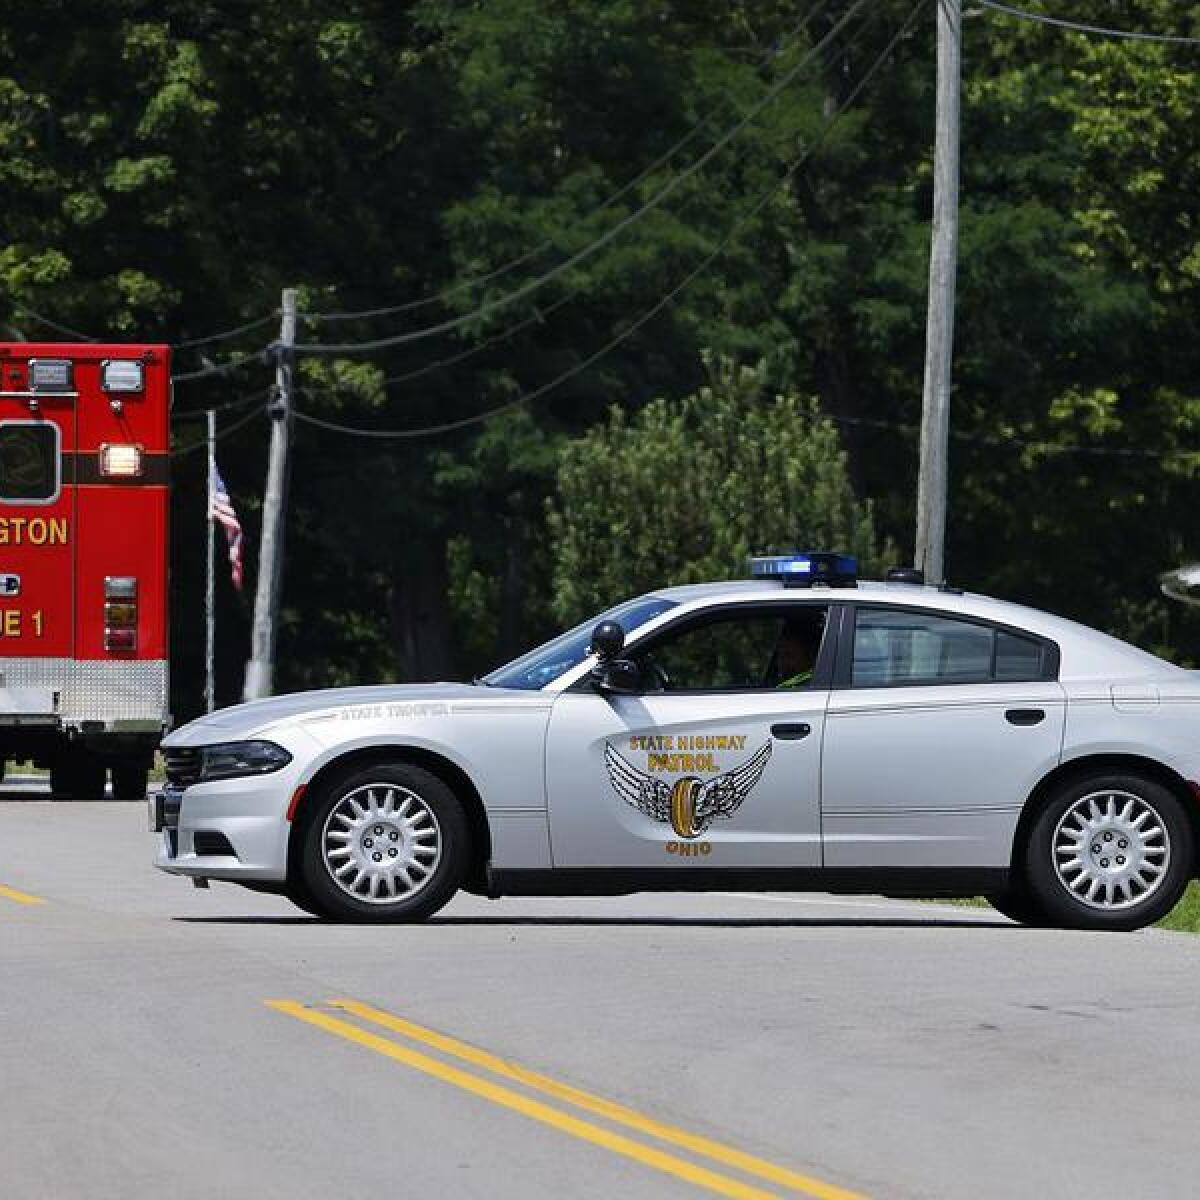 Ohio police seal off a road during a standoff with an armed man.